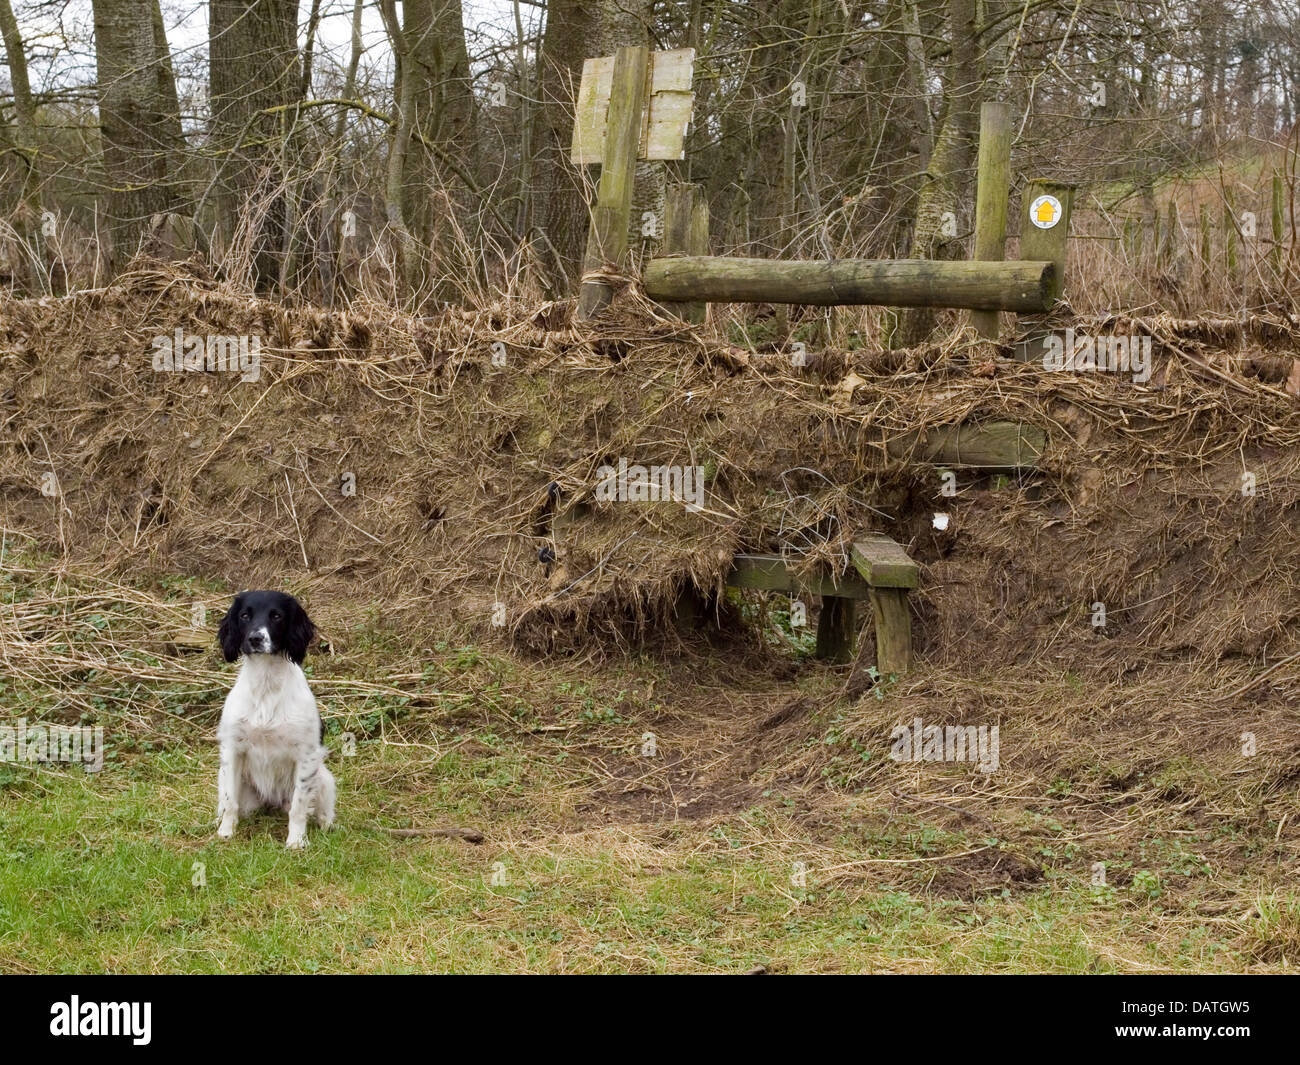 stile and fence after floods Stock Photo